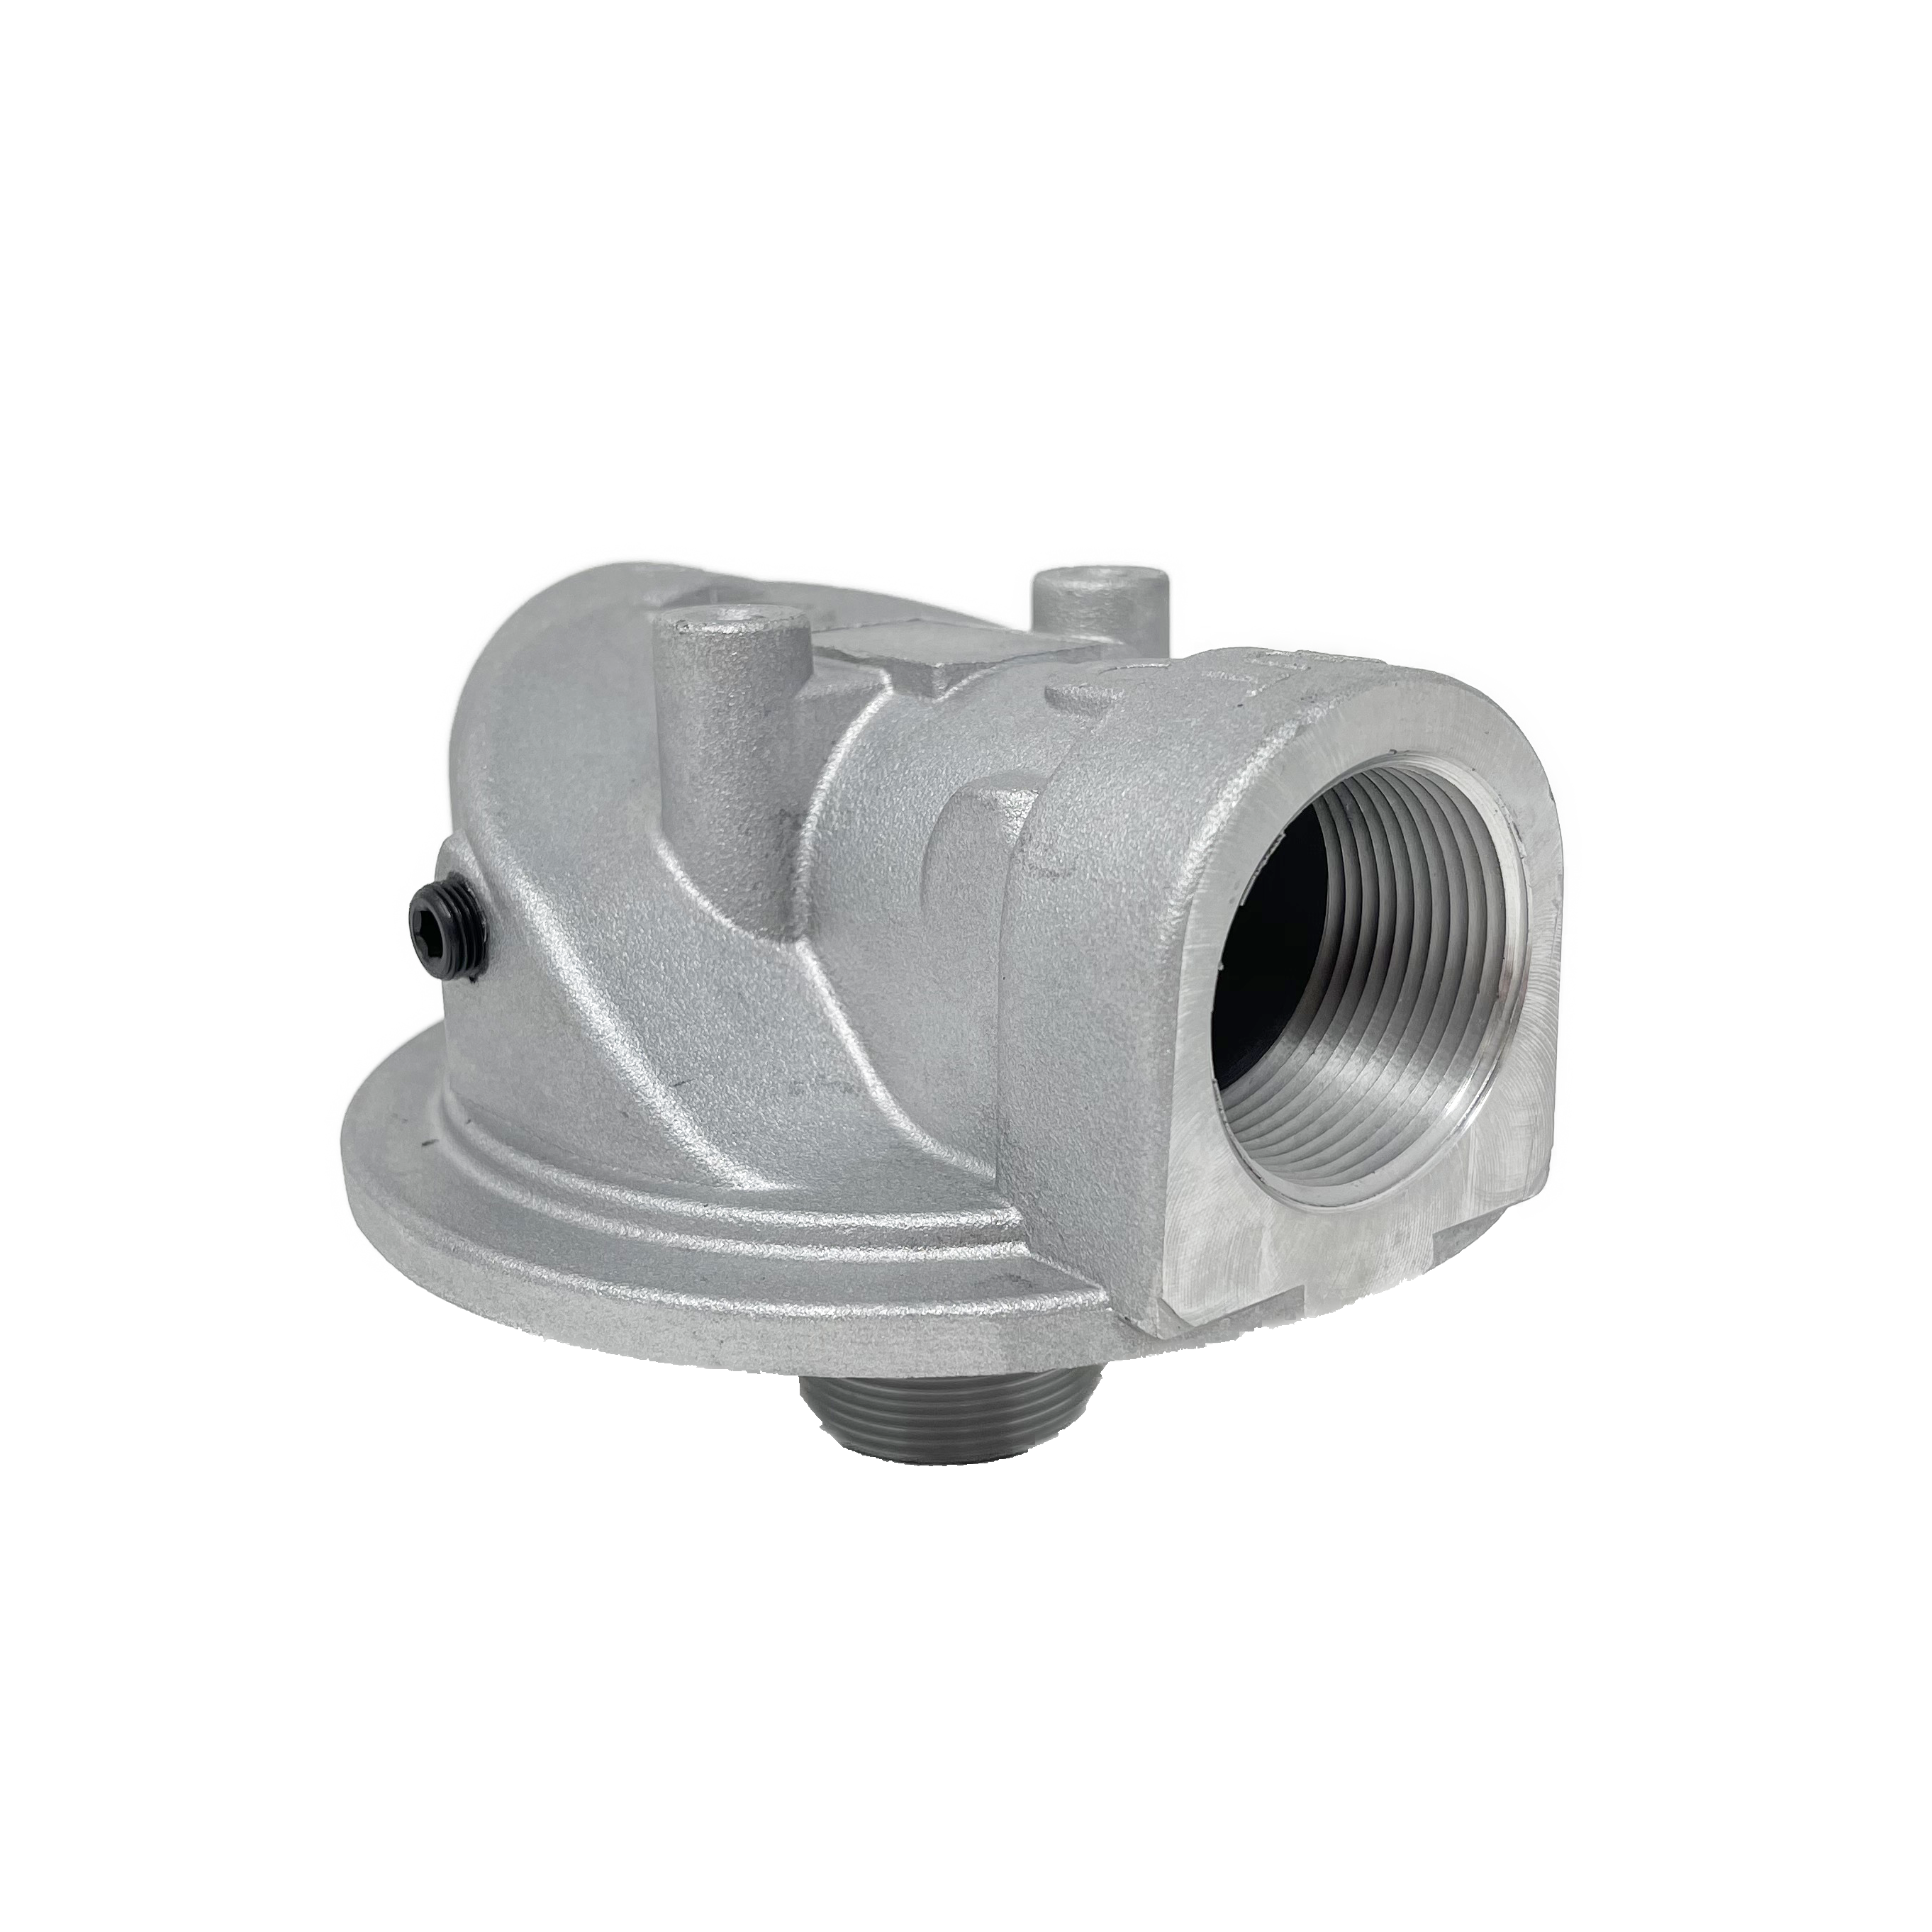 SSF-120-B1.7-1 : Stauff SSF Spin-On Filter Head, 60 GPM, 174psi, 1.25" NPT, with Bypass, Clogging indicator port drilled for Return